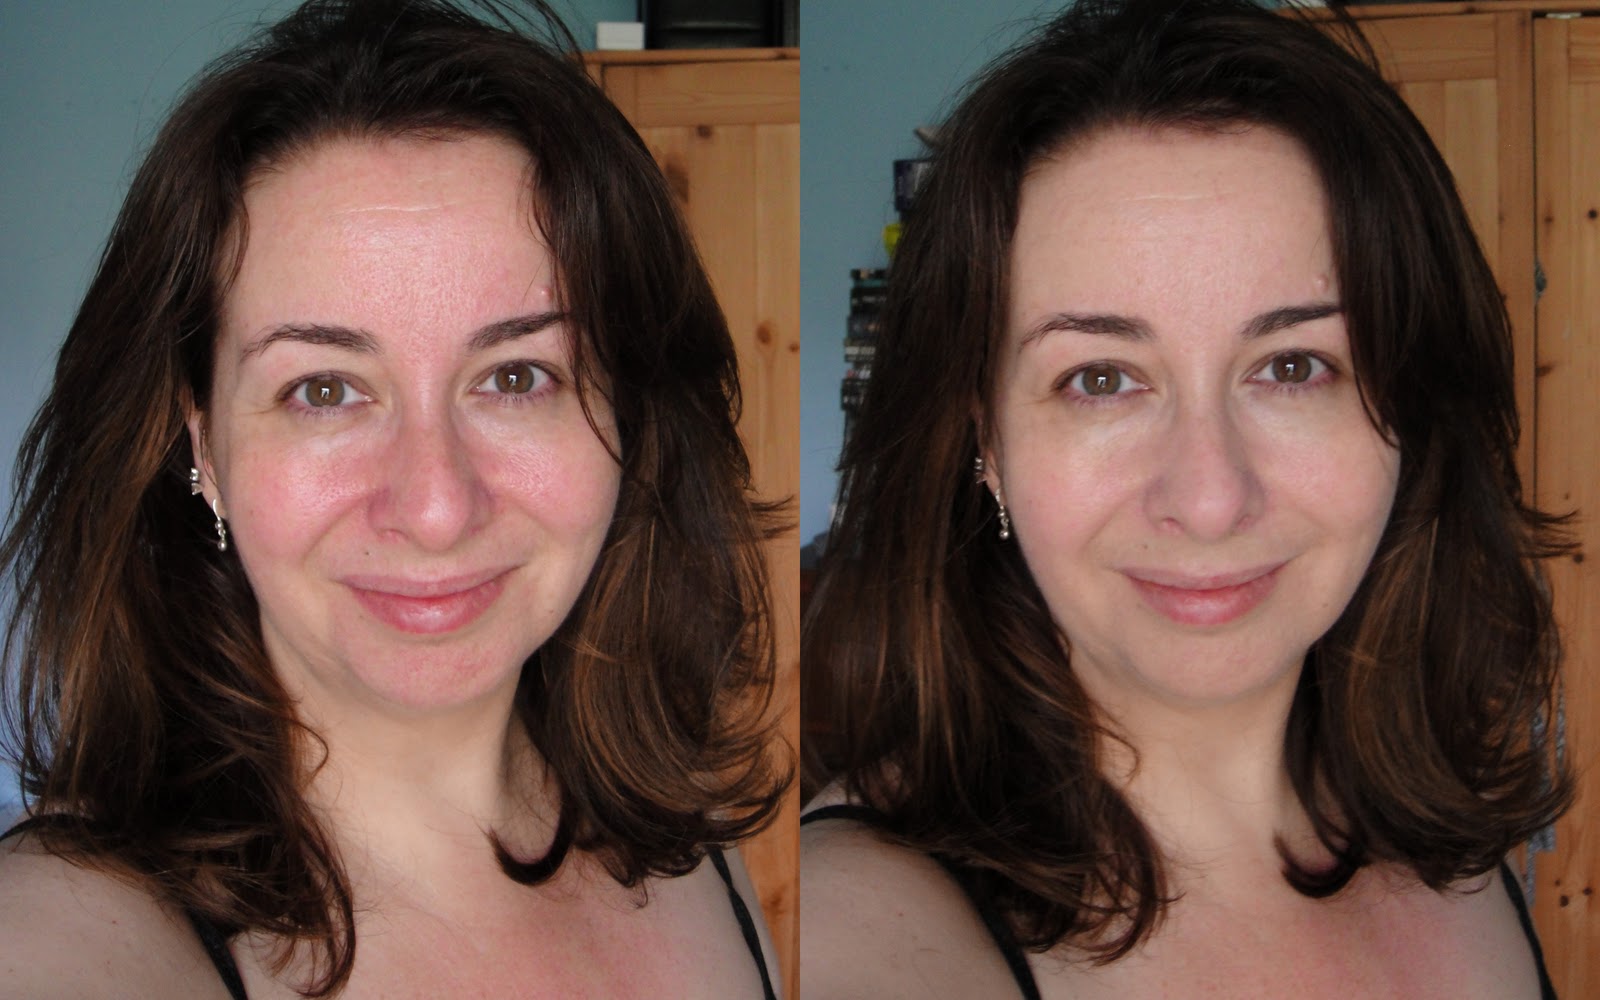 armani face fabric foundation review